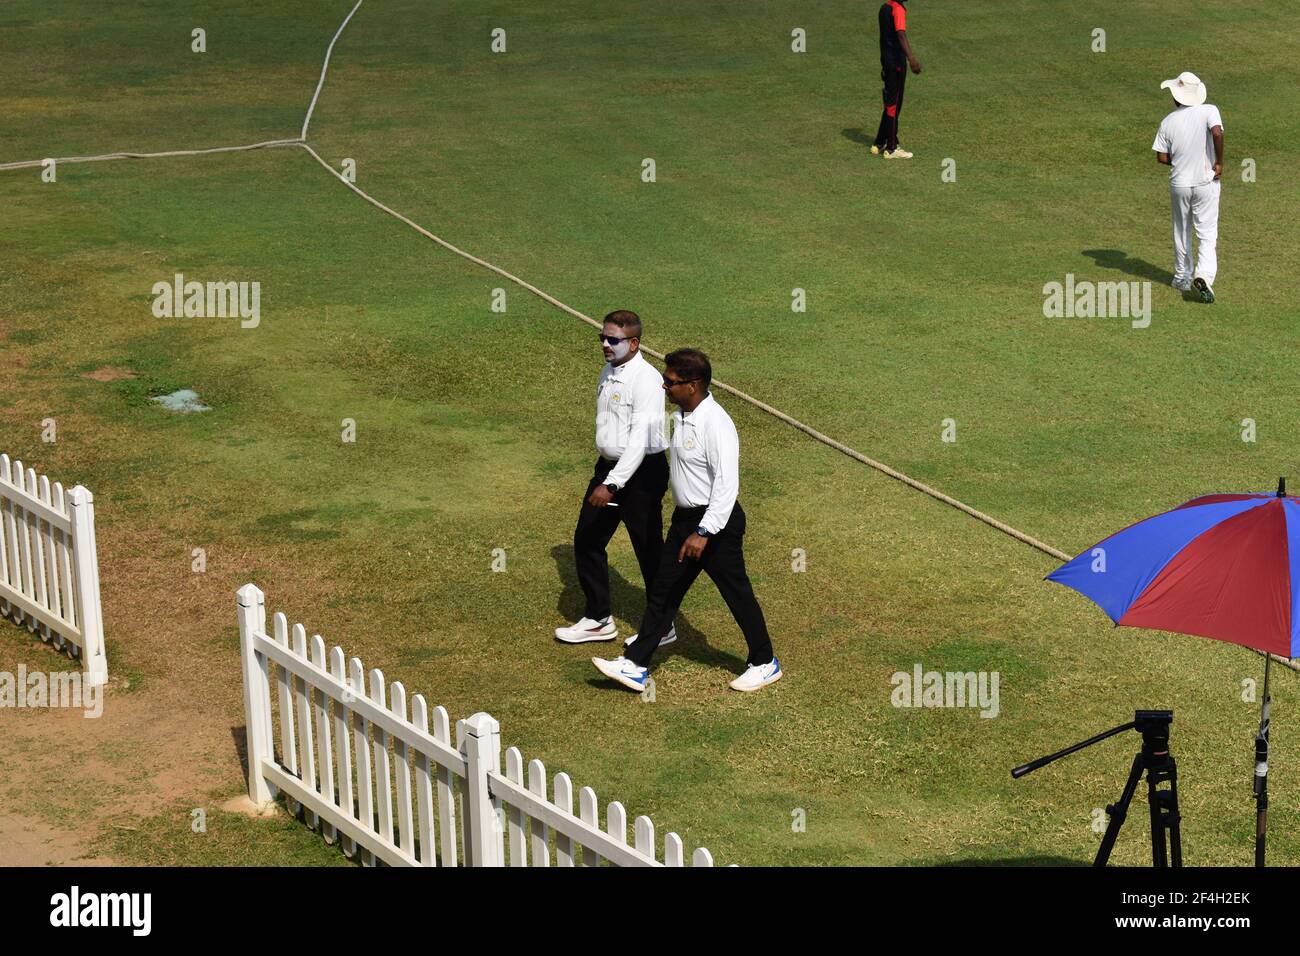 Umpires walking in during a cricket match. Picturistic school cricket ground. St. Thomas College, Mt. Lavinia. Colombo, Sri Lanka. Stock Photo